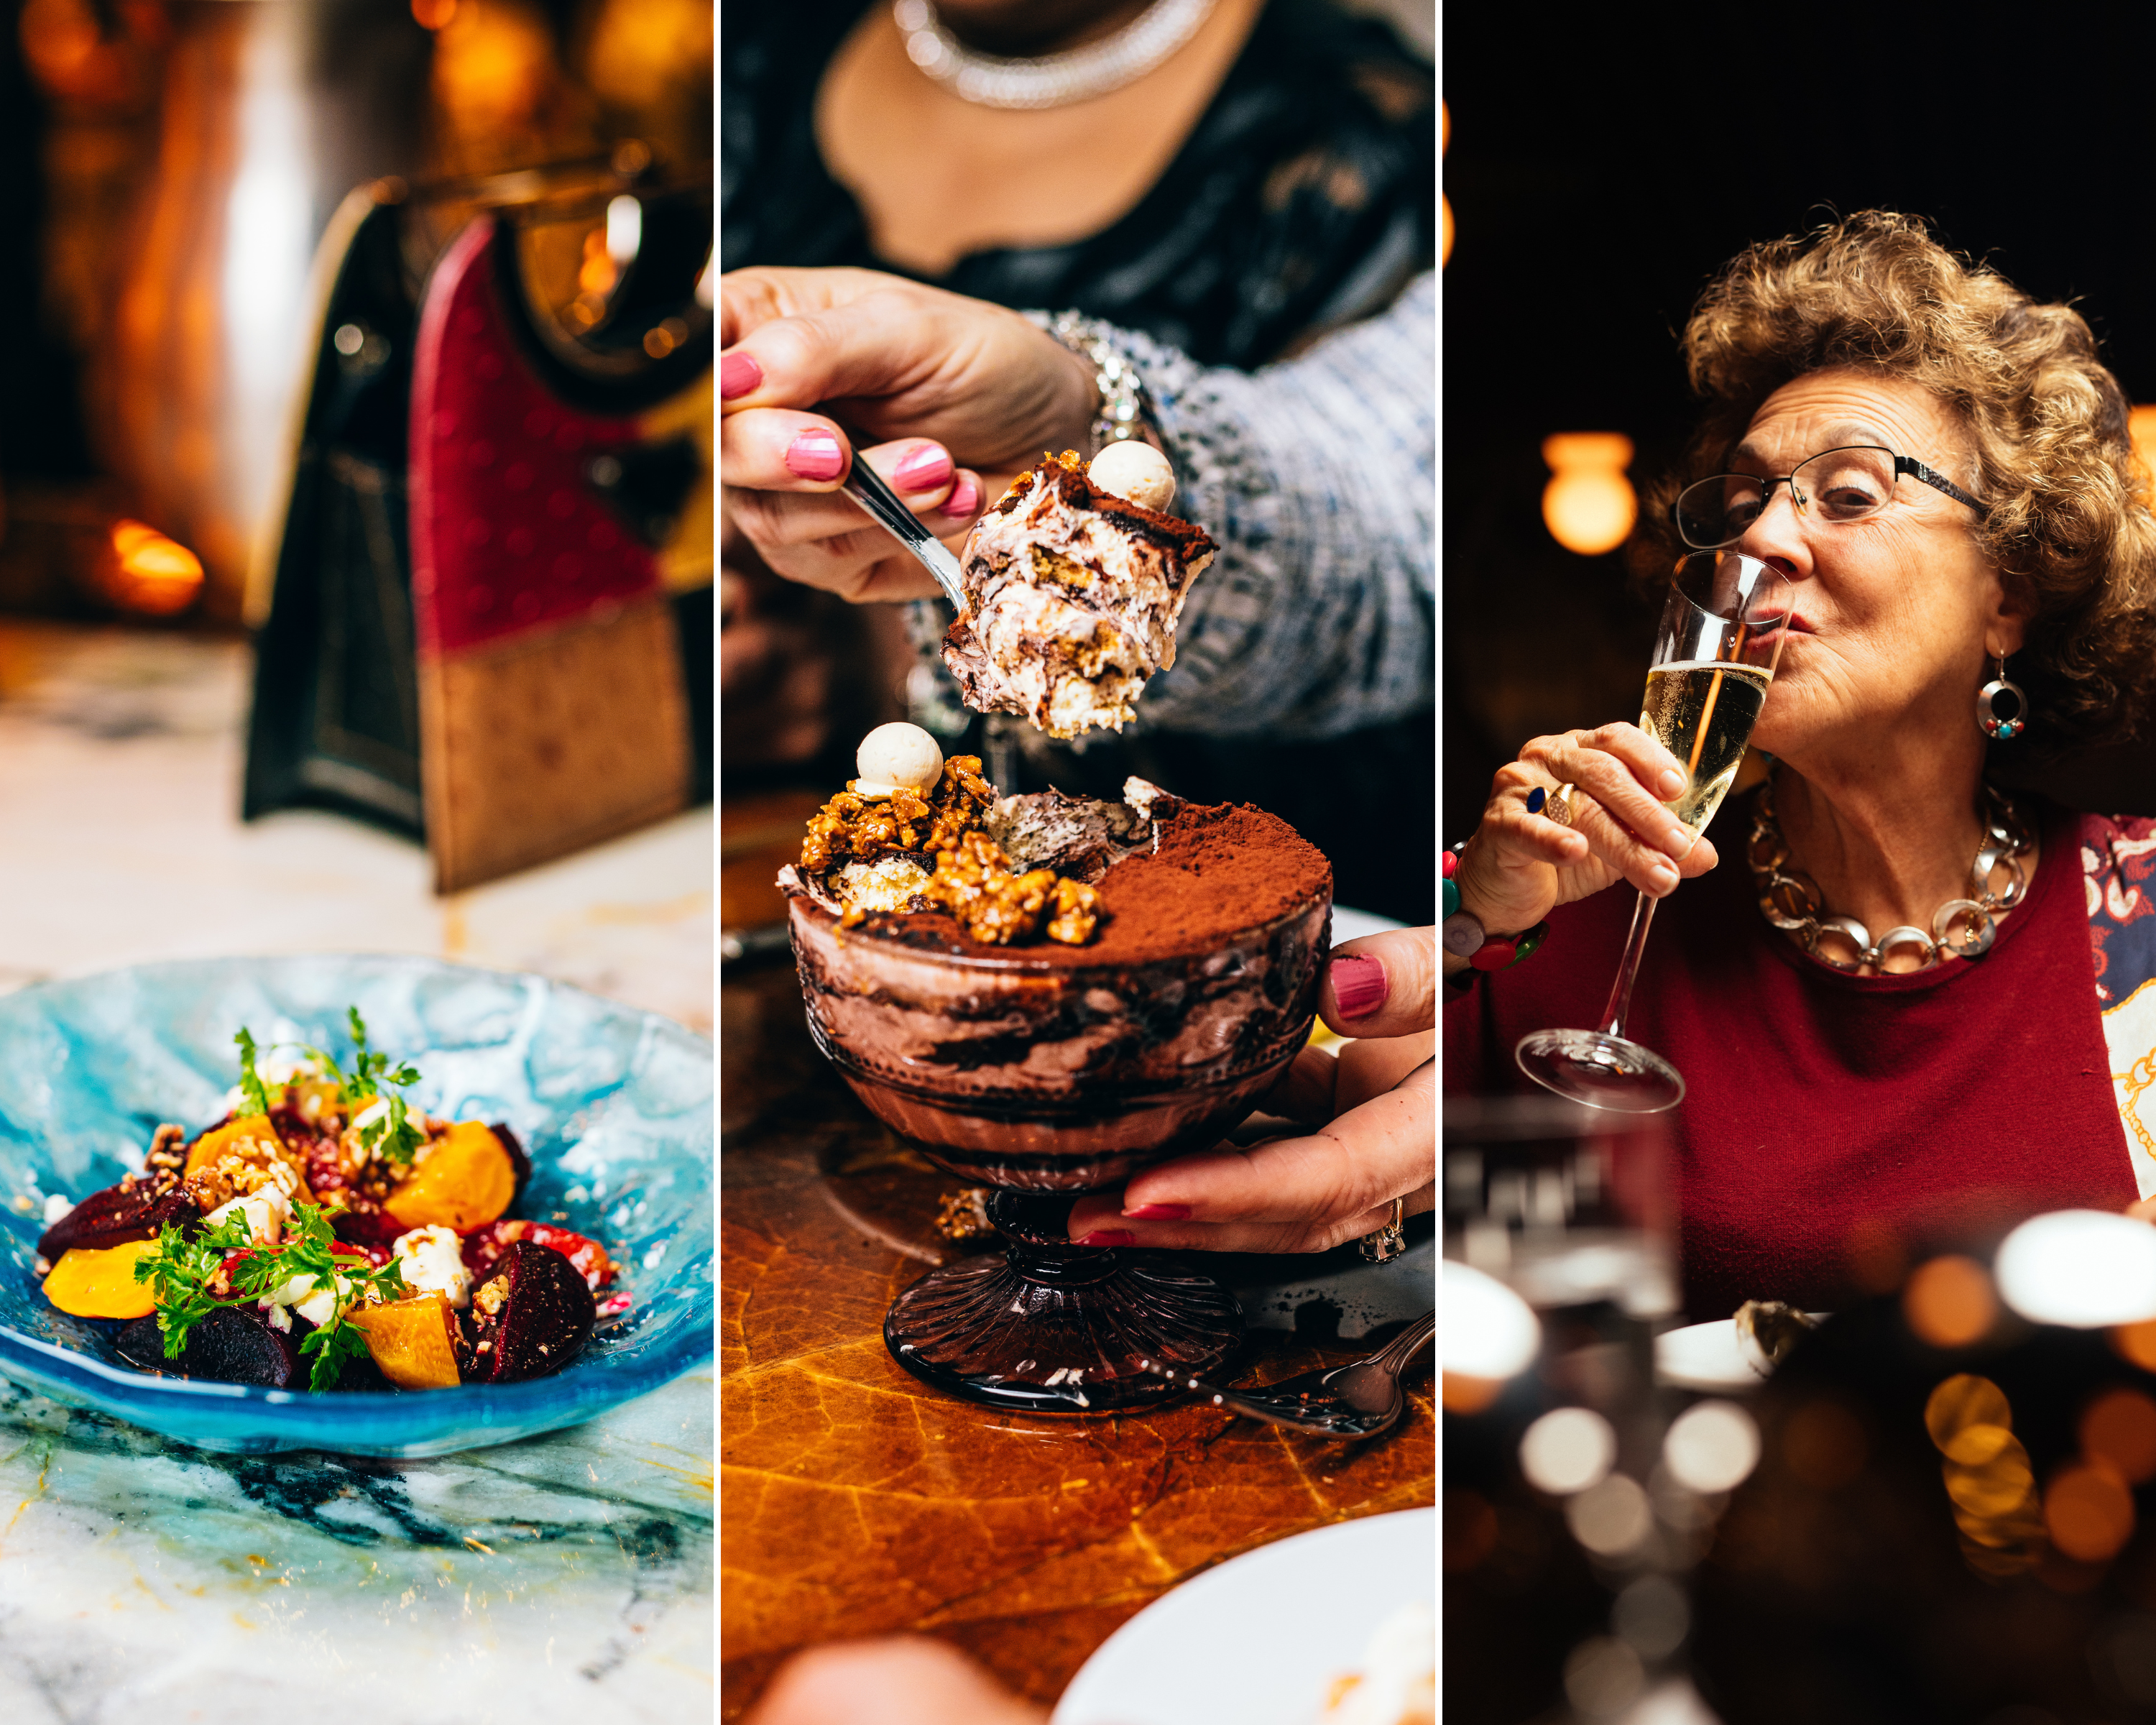 A collage of three images: beets on a blue plate; a hand scooping tiramisu; a woman drinking a glass of champagne